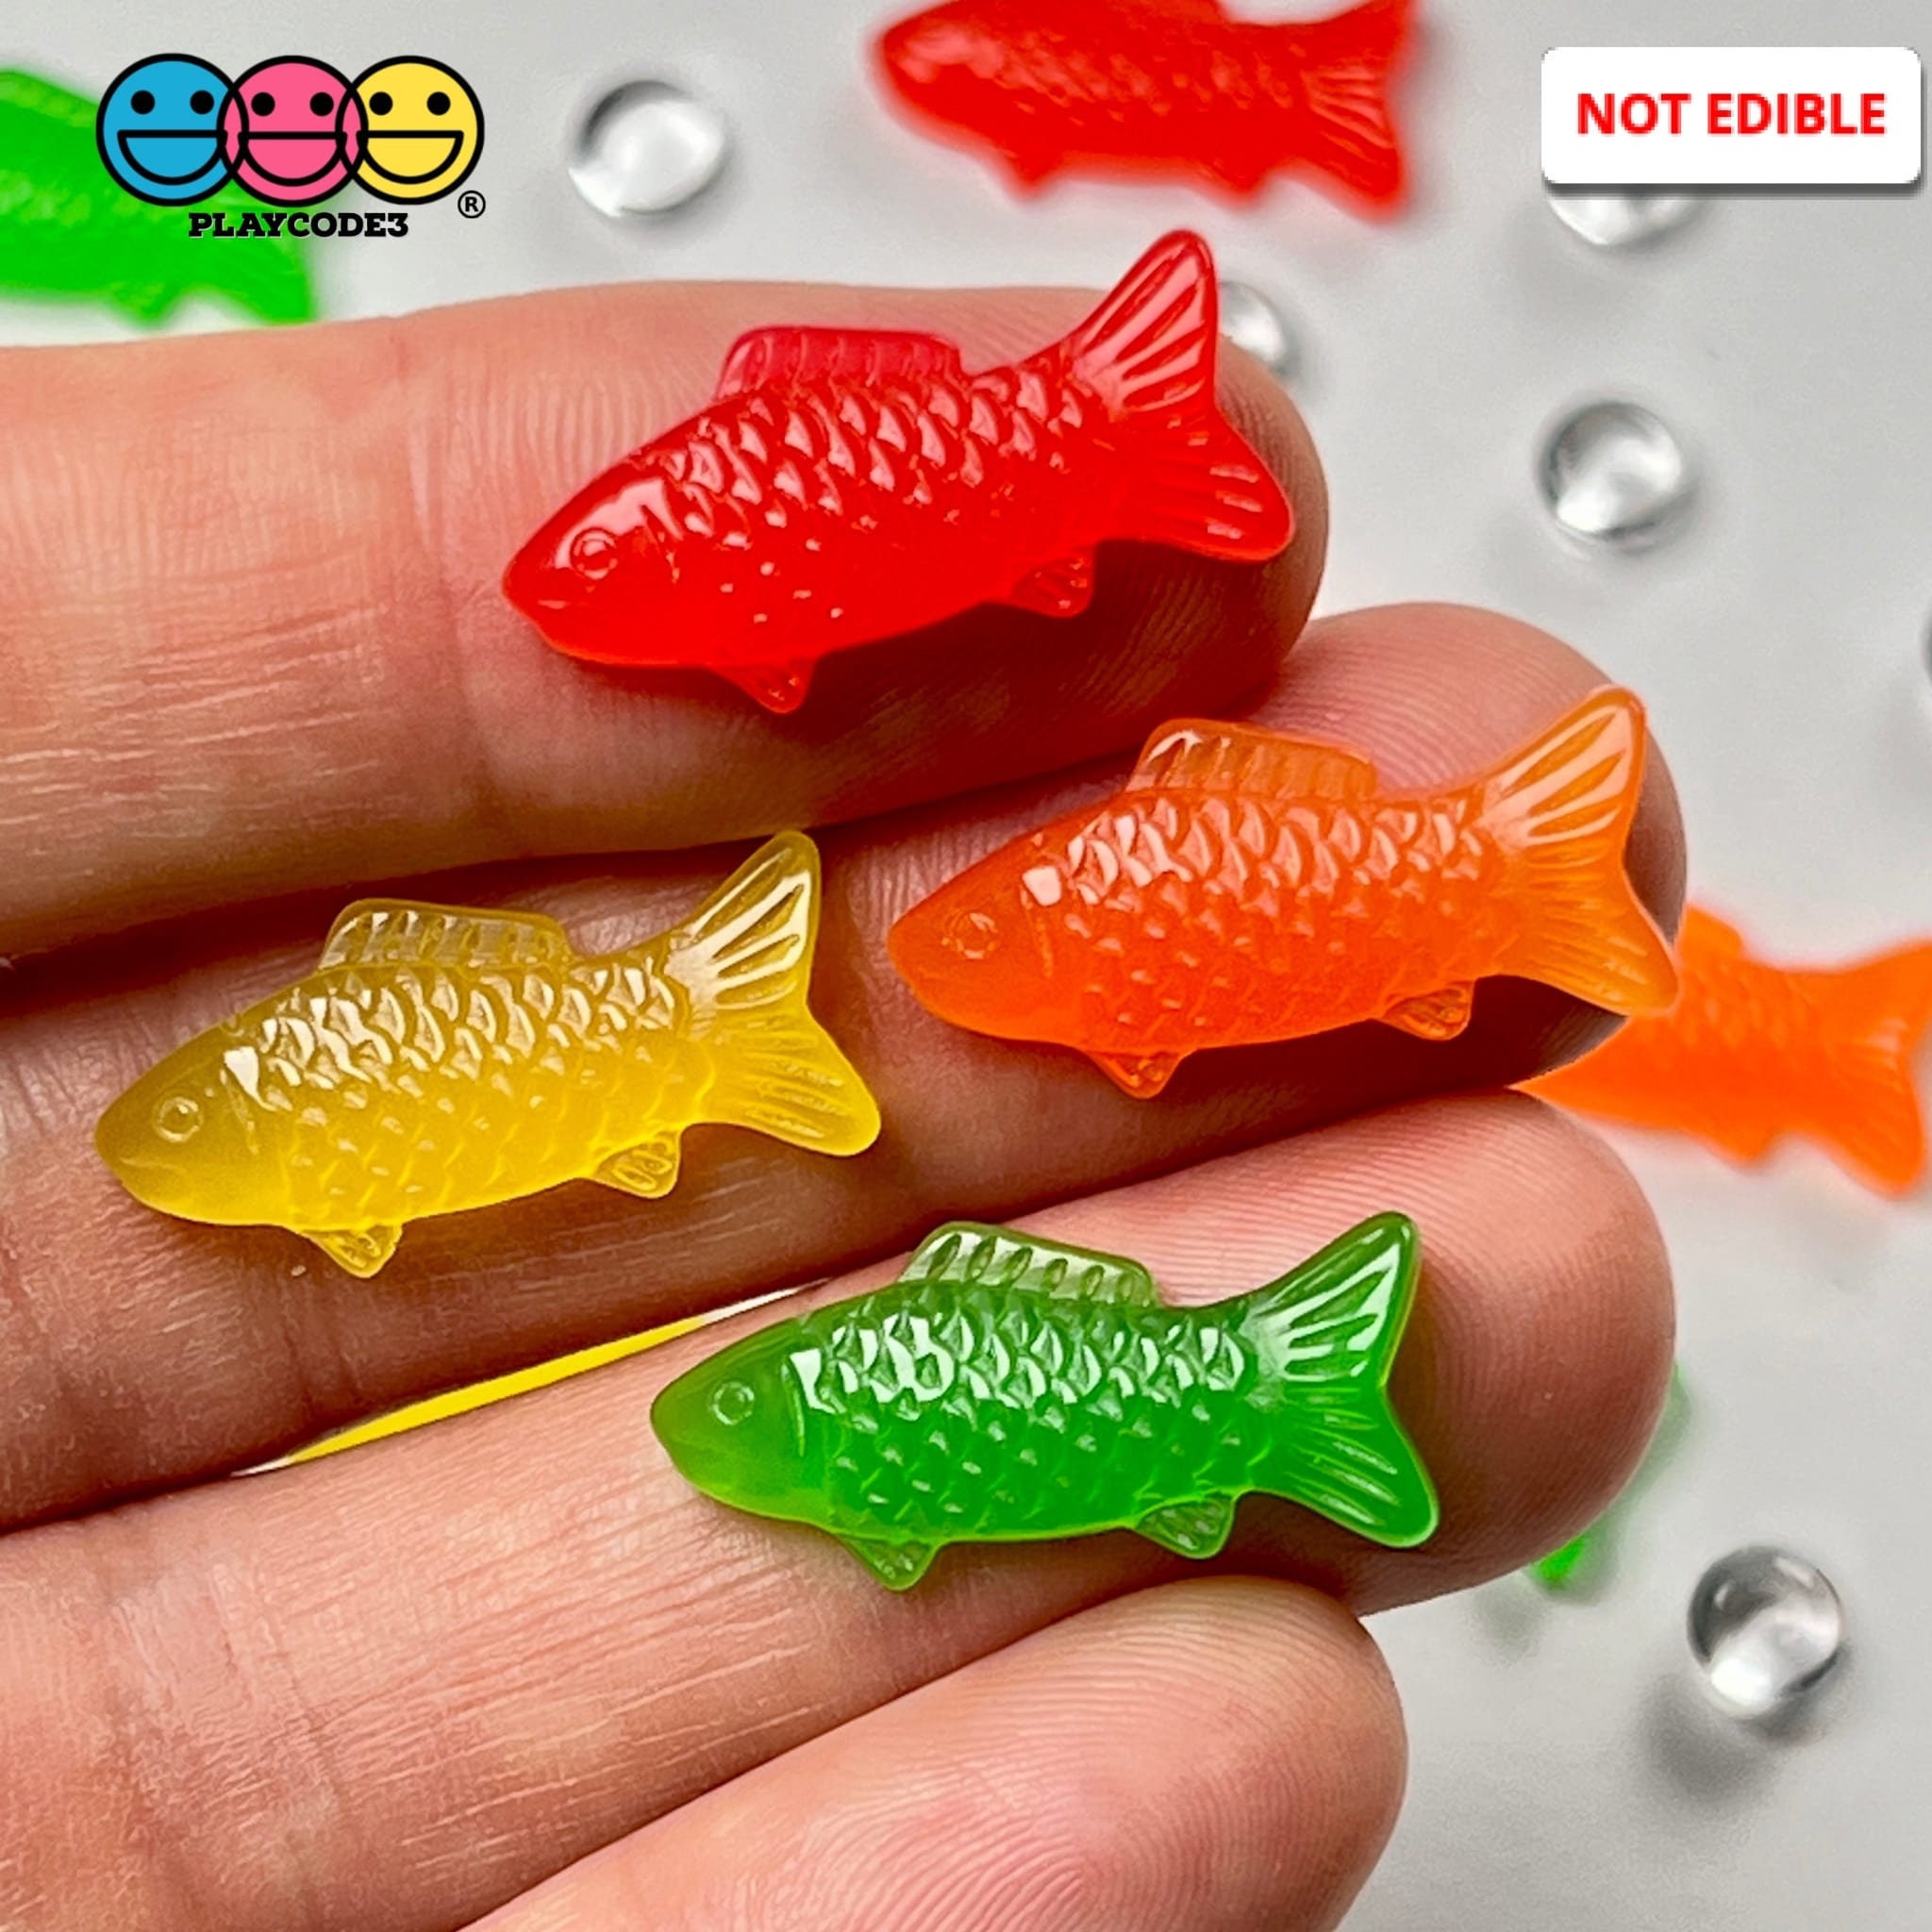  Toy Fish by Toy Fish Factory, Toy Fish Figurines, Educational Fish  Toy, Fish Cake Topper, 3” Long Plastic Fish Toys, Plastic Realistic Fish,  Largemouth Bass, Catfish (The Complete Collection) : Toys